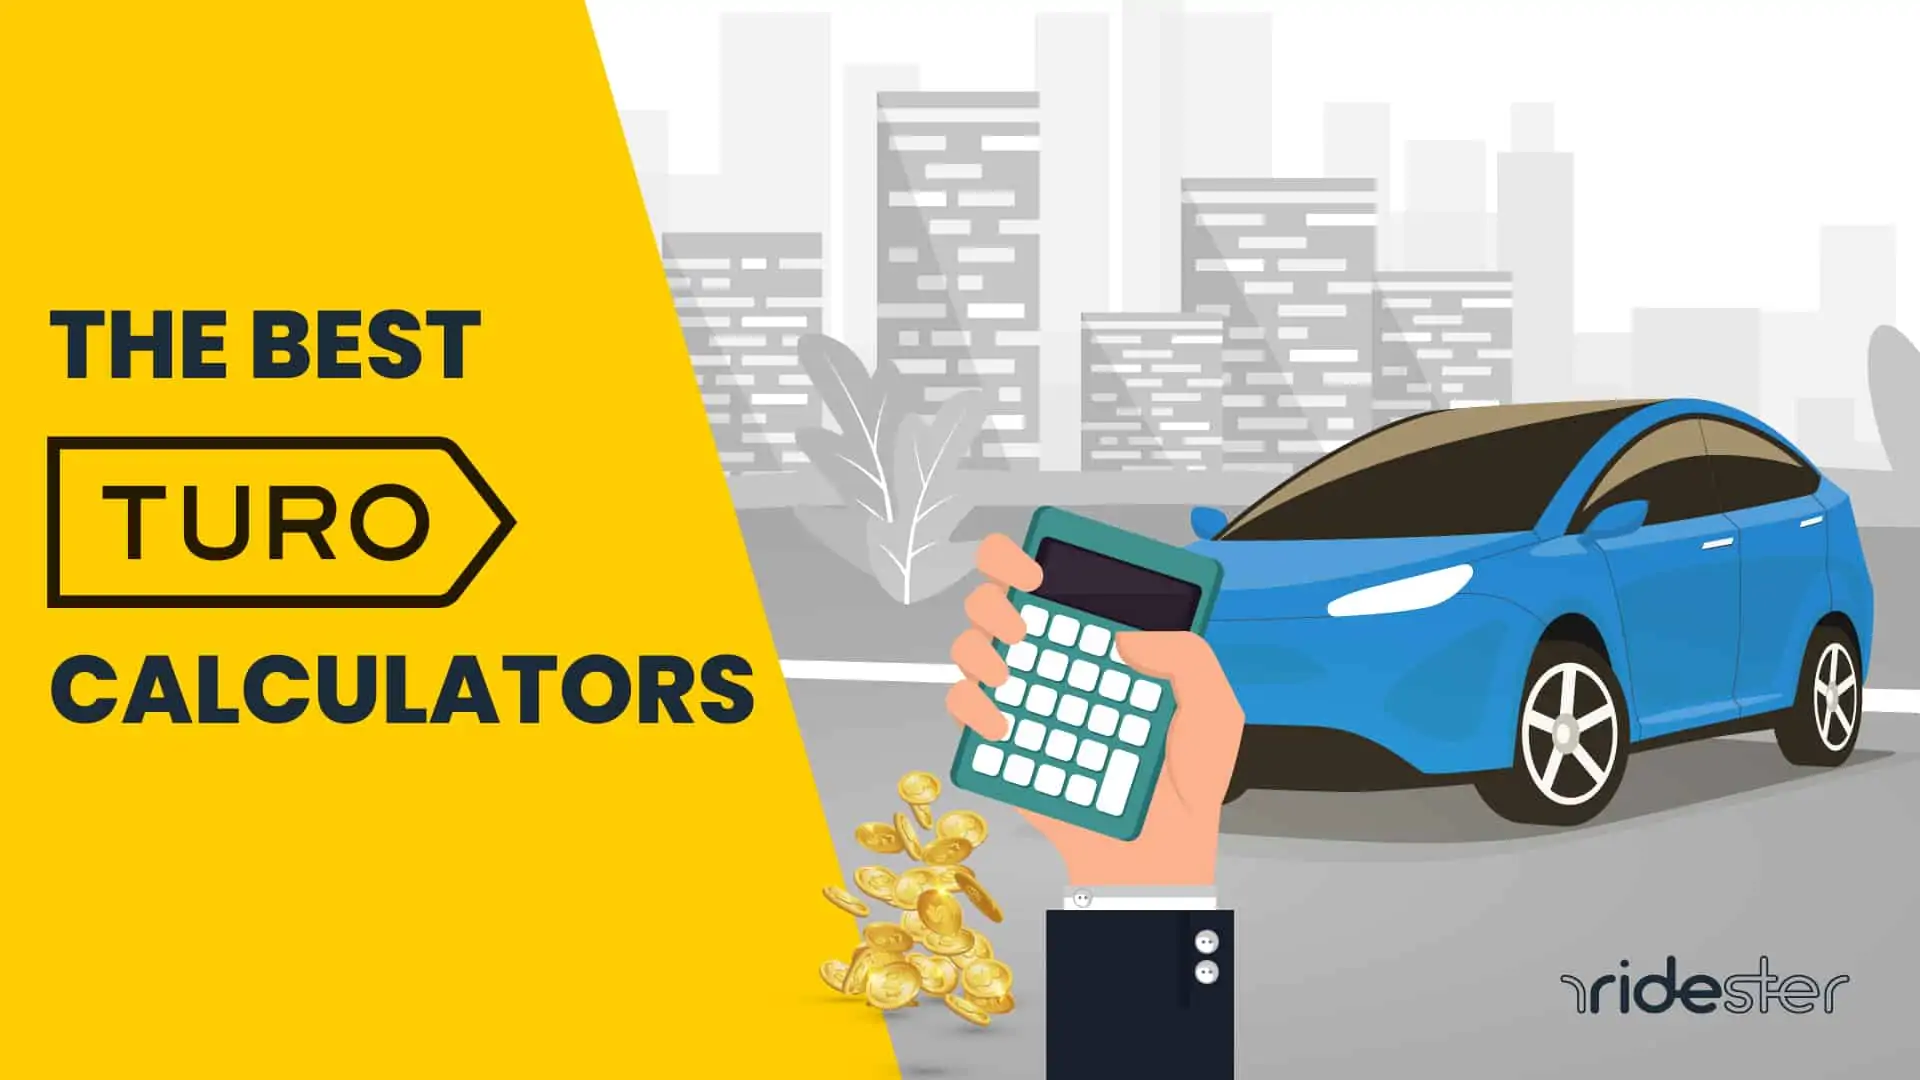 vector graphic showing a city background, a care in the foreground, and a hand holding a calculator next to the words "The Best Turo Calculators"